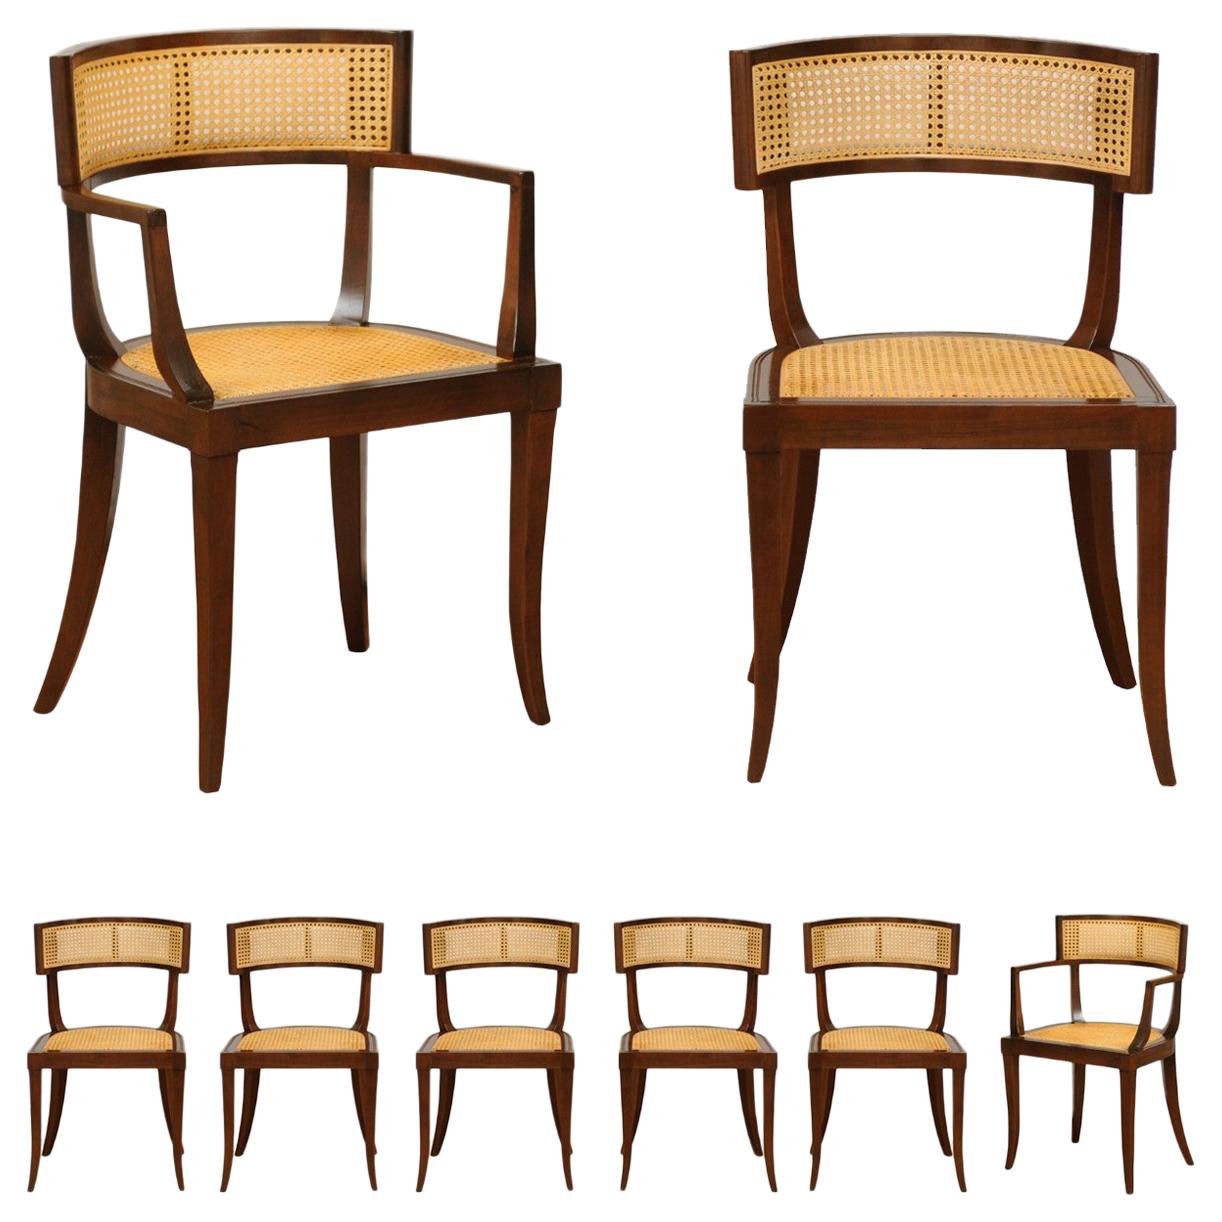 Exquisite Set of 8 Klismos Cane Dining Chairs by Baker, circa 1958, Cane Seats